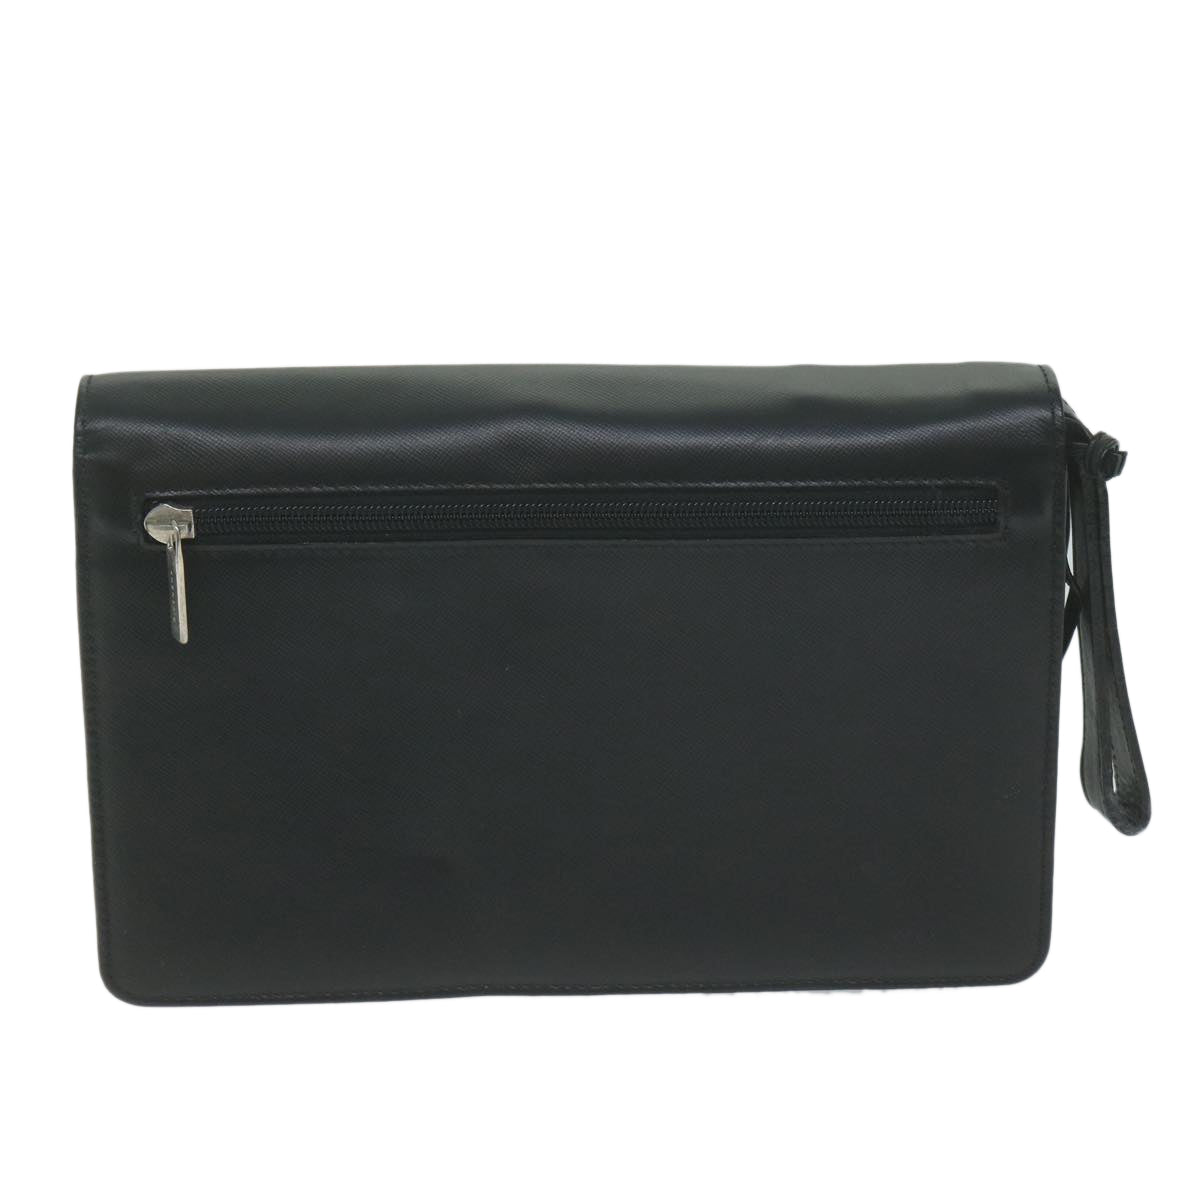 GIVENCHY Clutch Bag Leather Black Auth bs11875